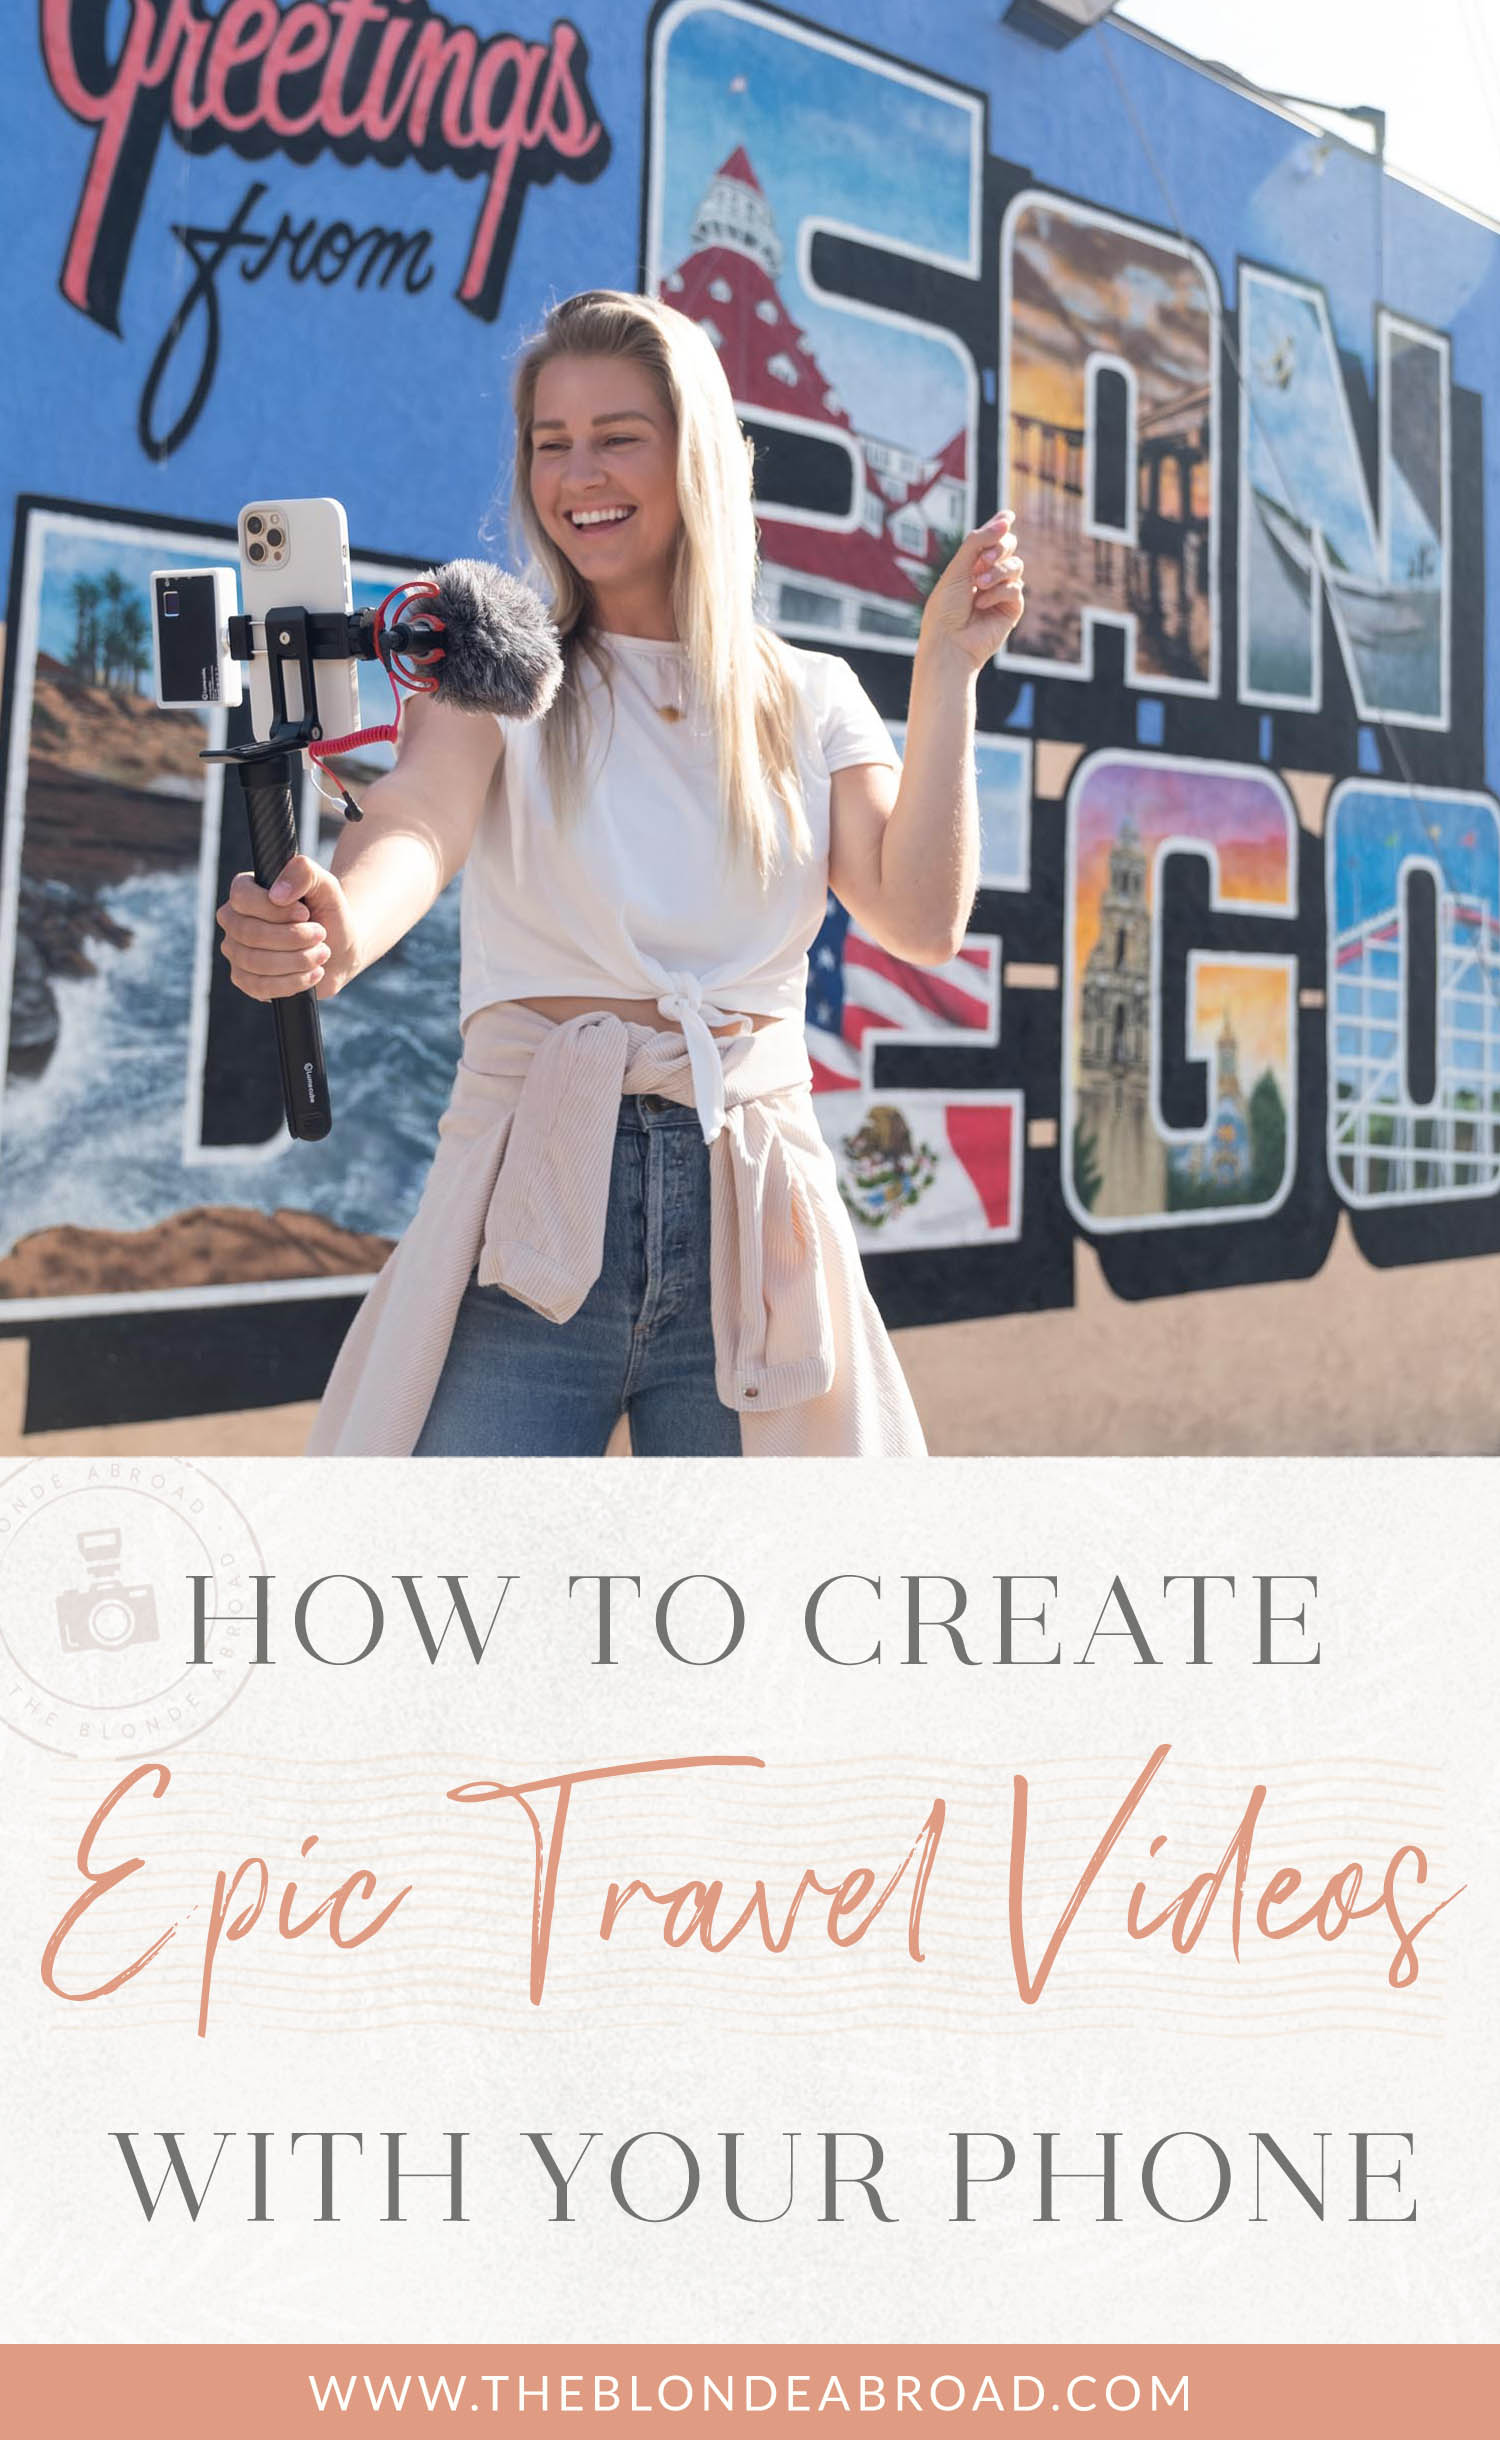 How to Create Epic Travel Videos